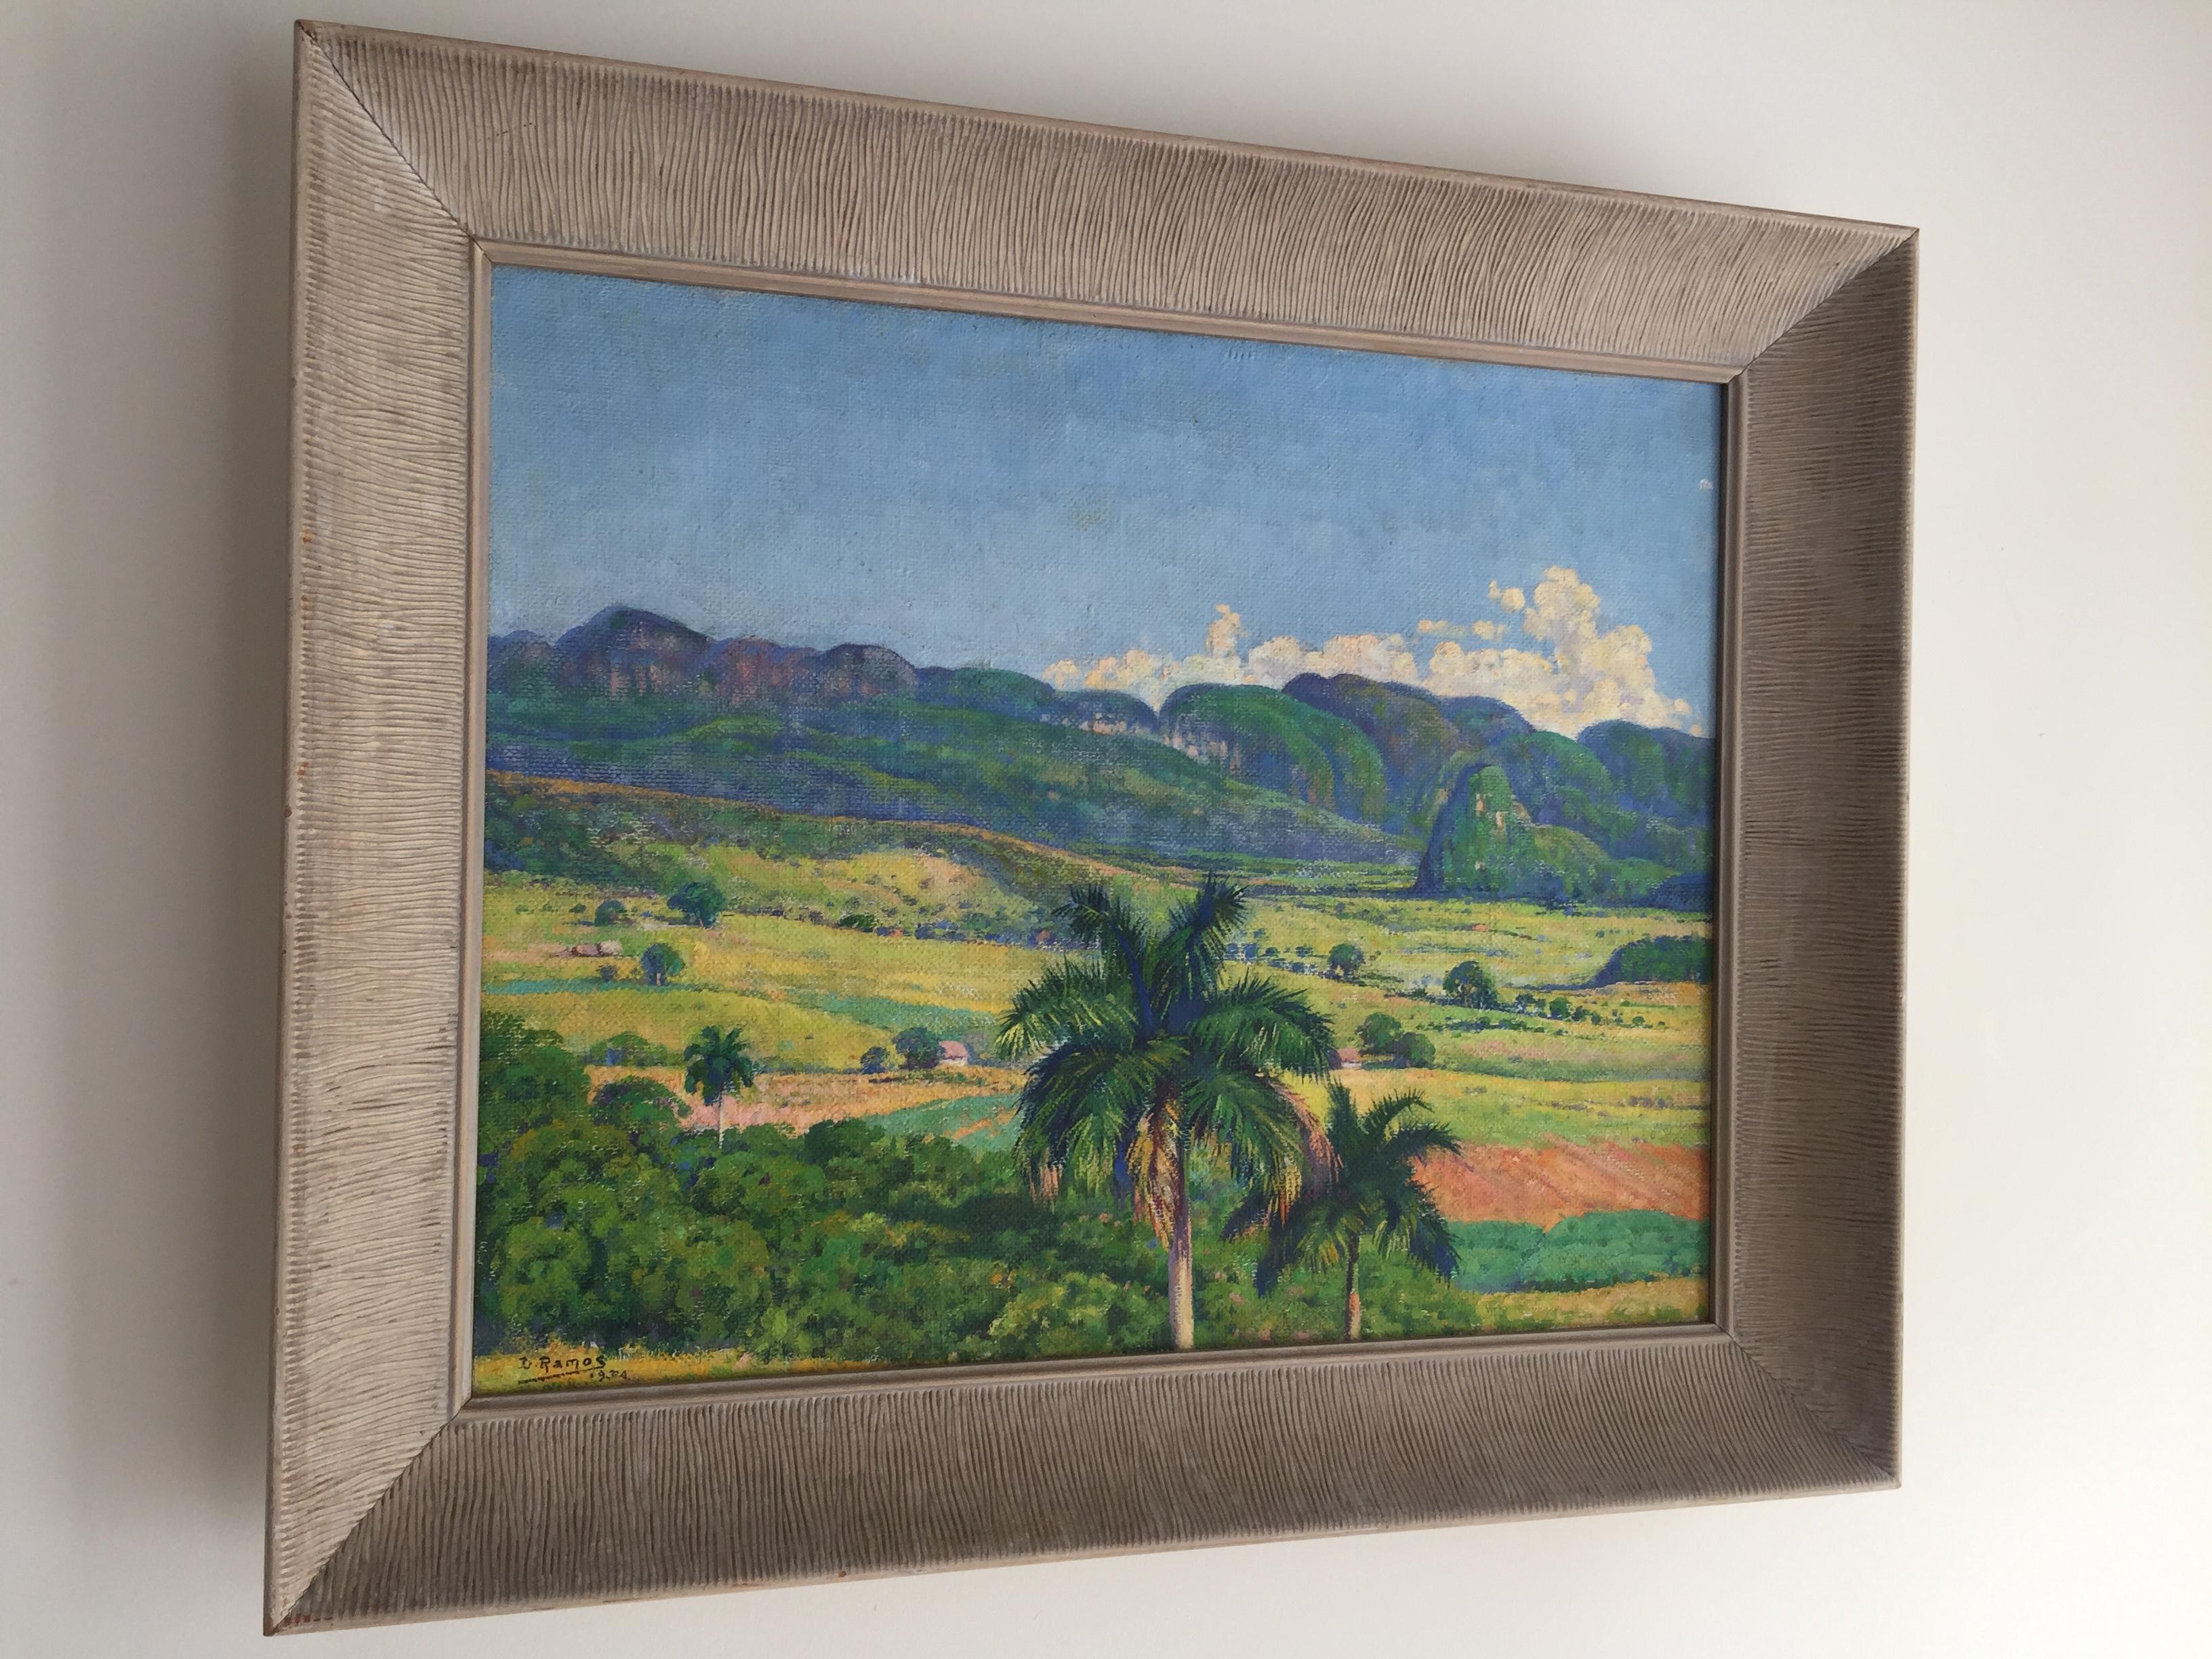 Domingo Ramos (1897-1967) paisaje Cubano oil on jute canvas painting.
Framed in the original Art Deco wood frame.. 
Signed by the artist, D. Ramos 1934 on front lower left. 
Painting measures 20